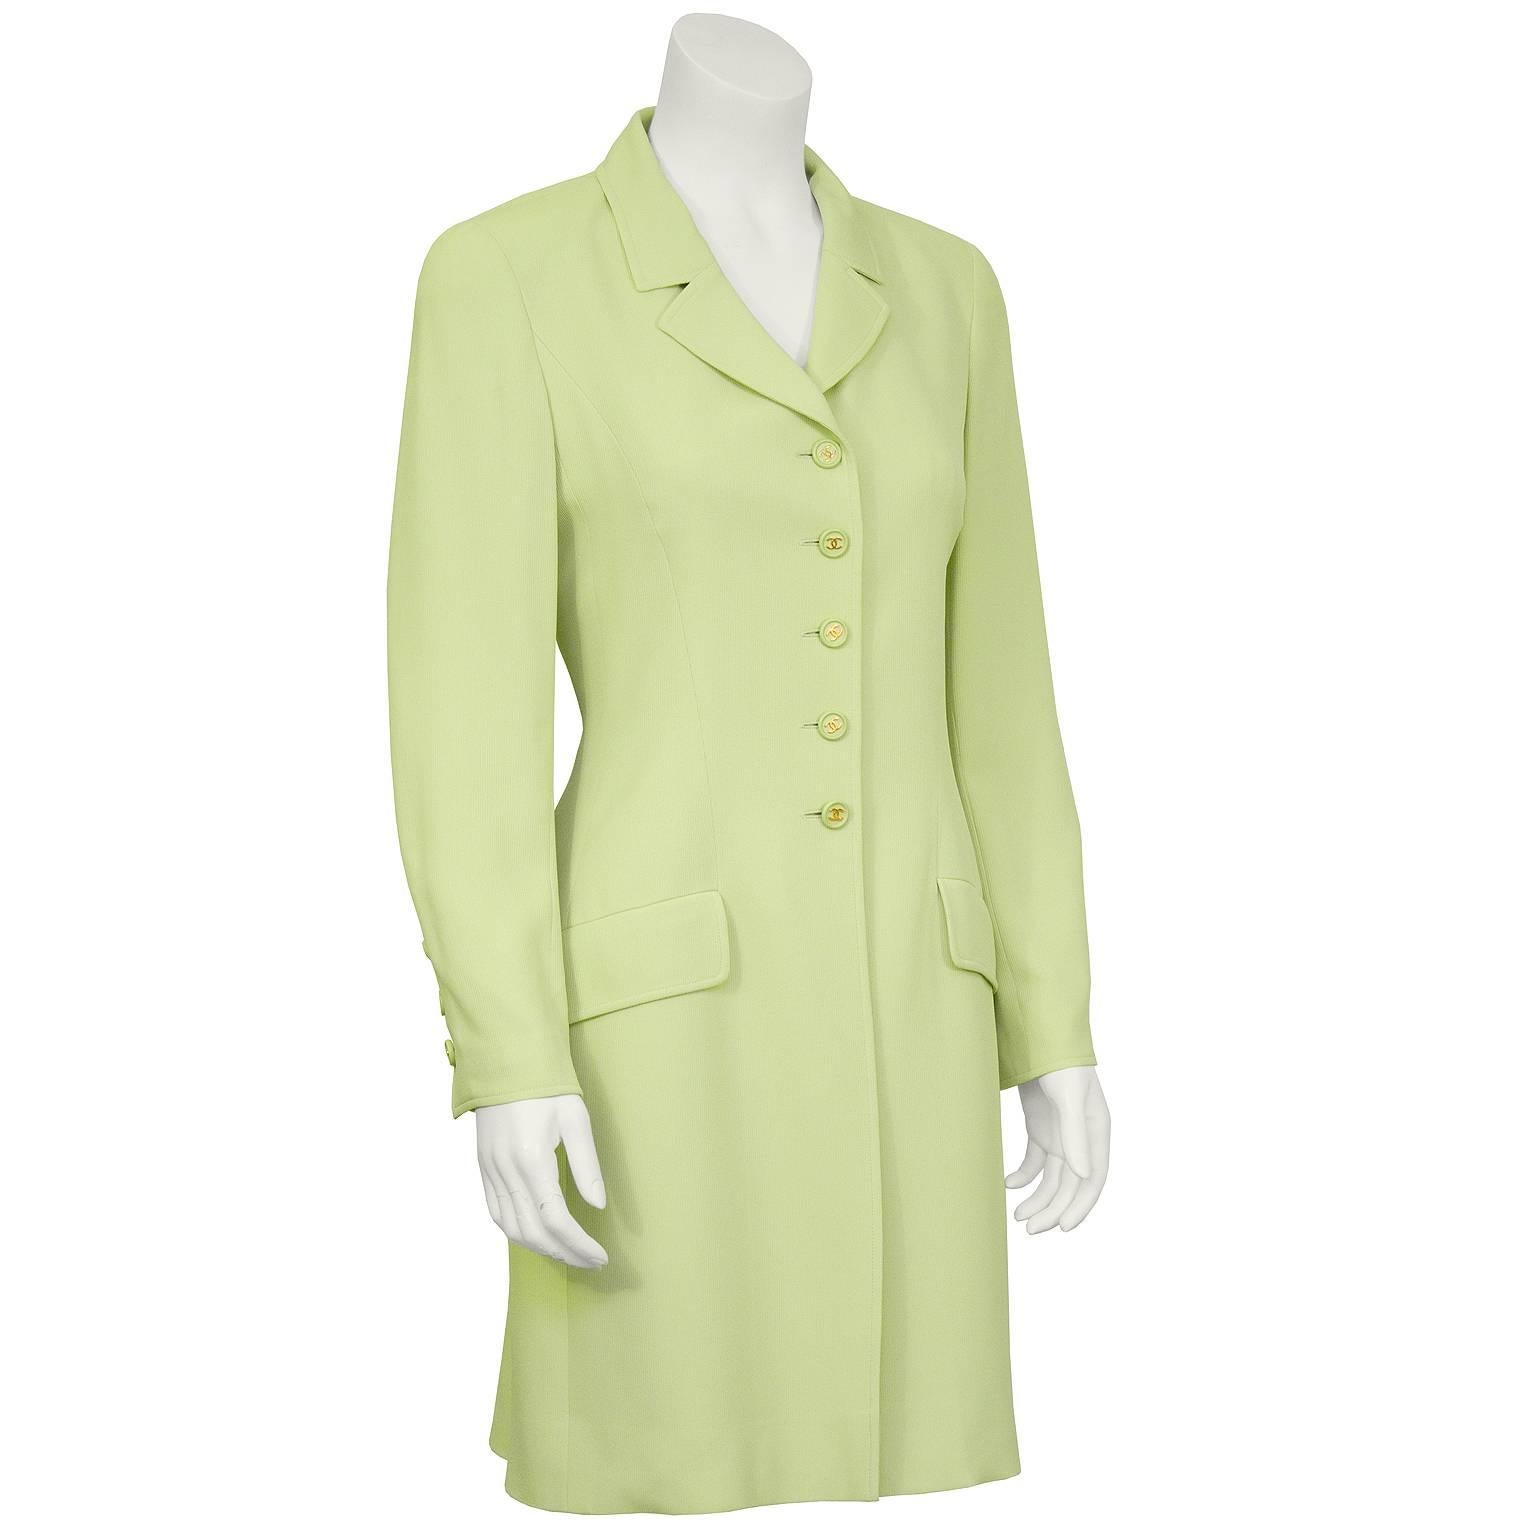 Chanel chartreuse silk-lined slip-style dress and long jacket from the Spring 1997 collection. The jacket has matching tonal CC buttons on the front as well as on the cuffs and two front flap pockets. The dress is fitted at the bust and has a seam